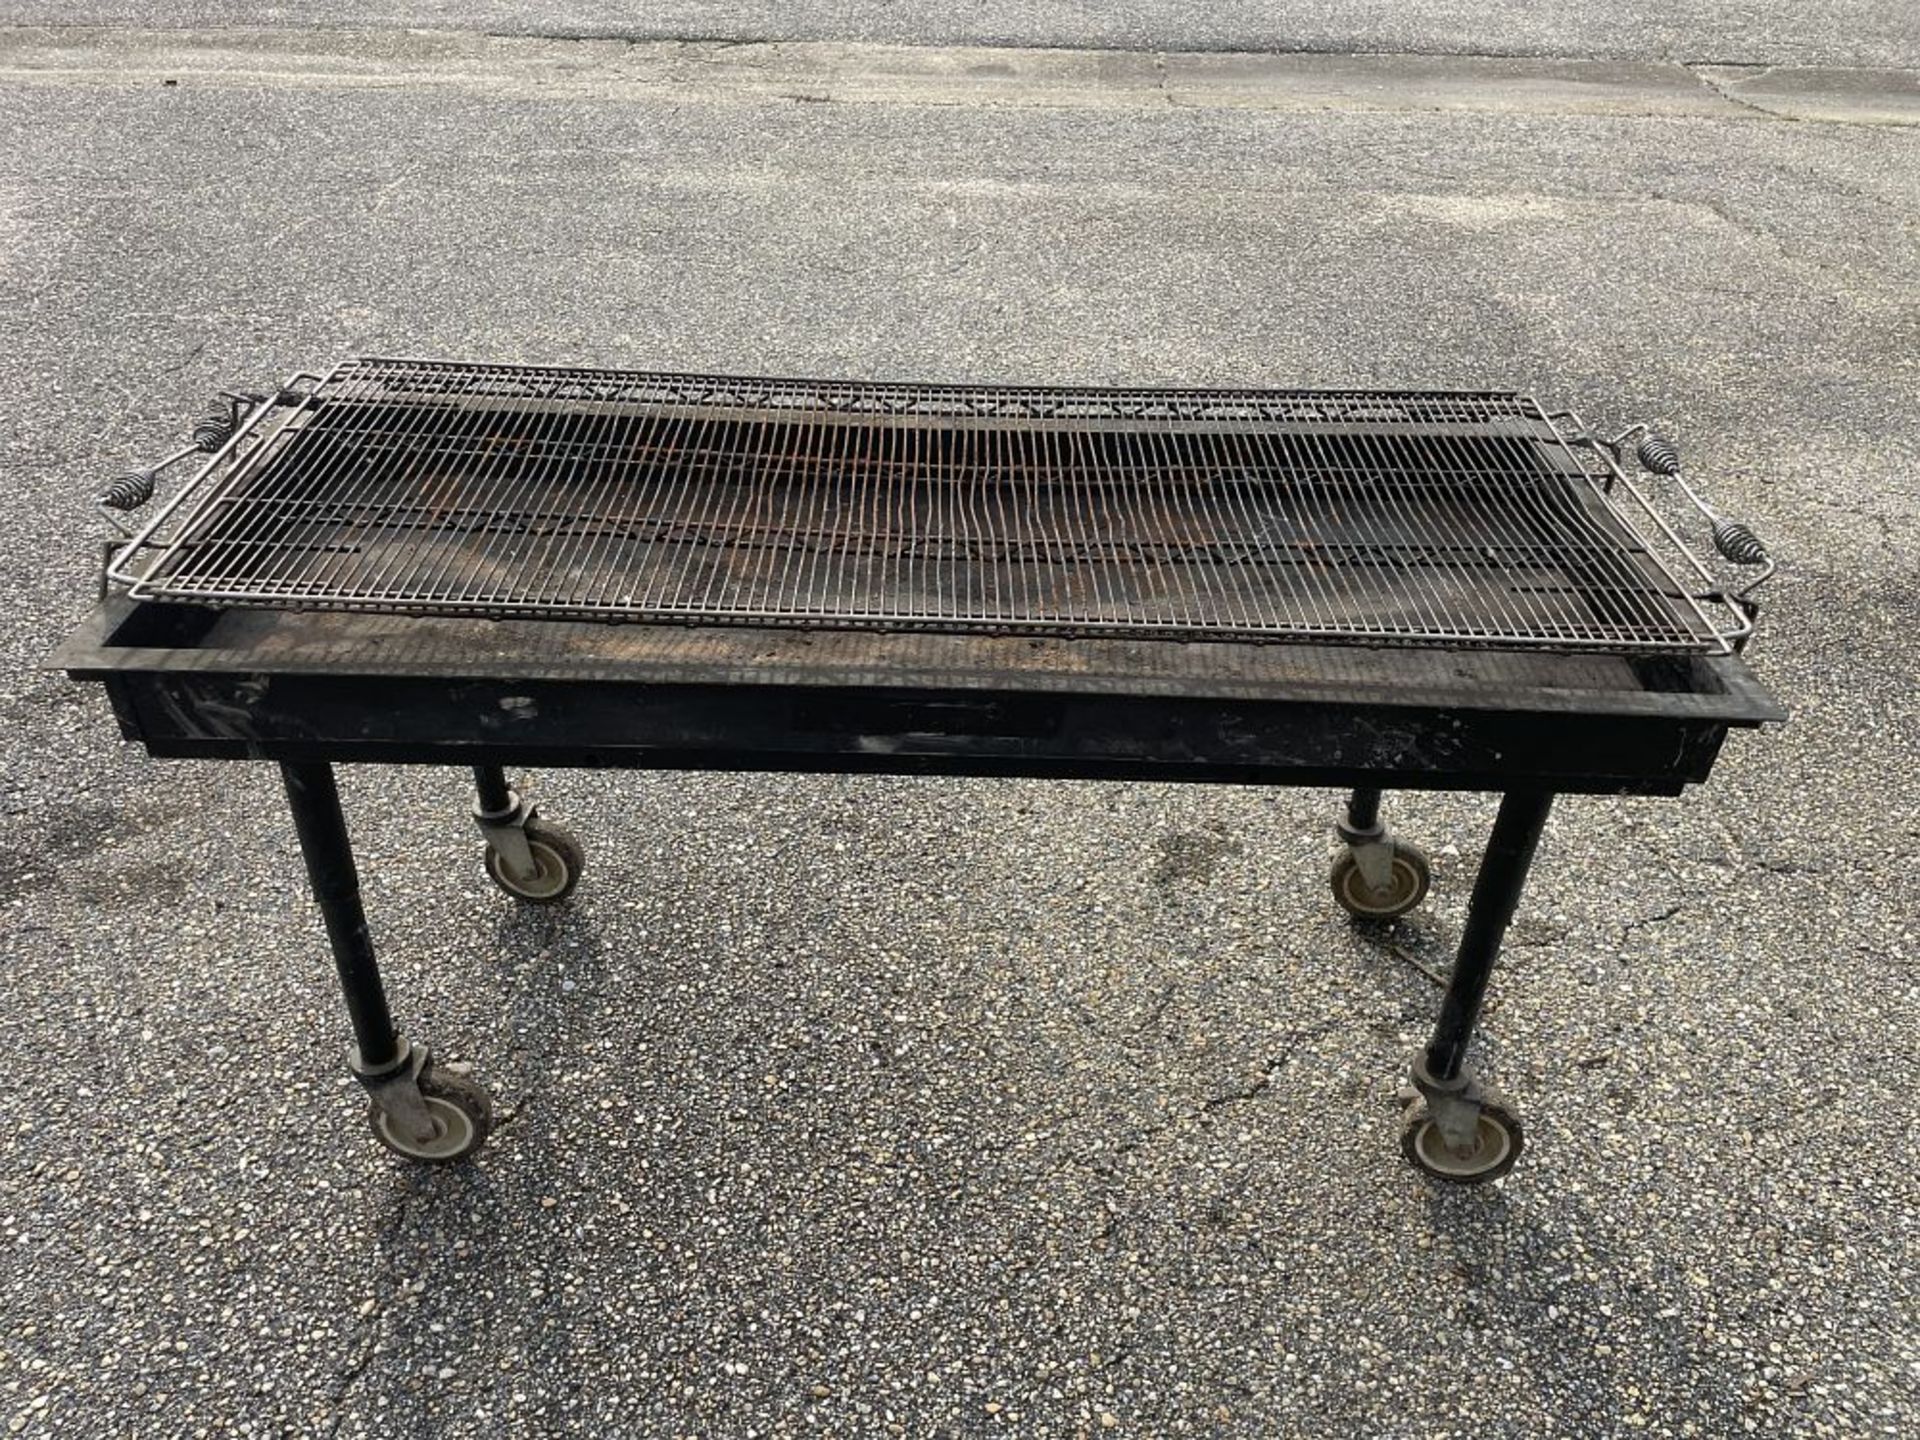 Charcoal Grill w/ collapsible legs